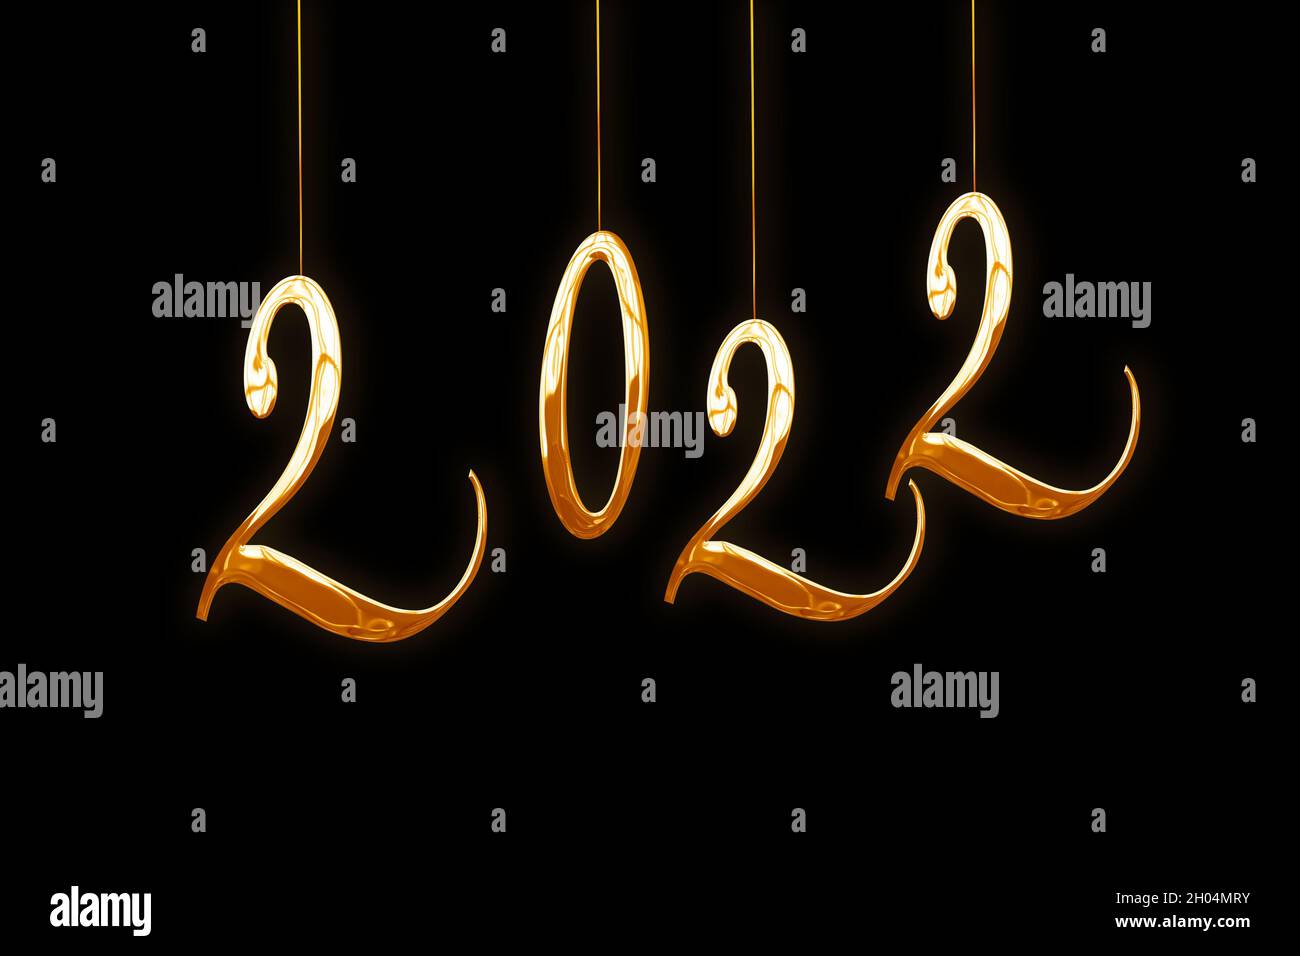 2022, new year card. hanging shiny numbers isolated on black background Stock Photo